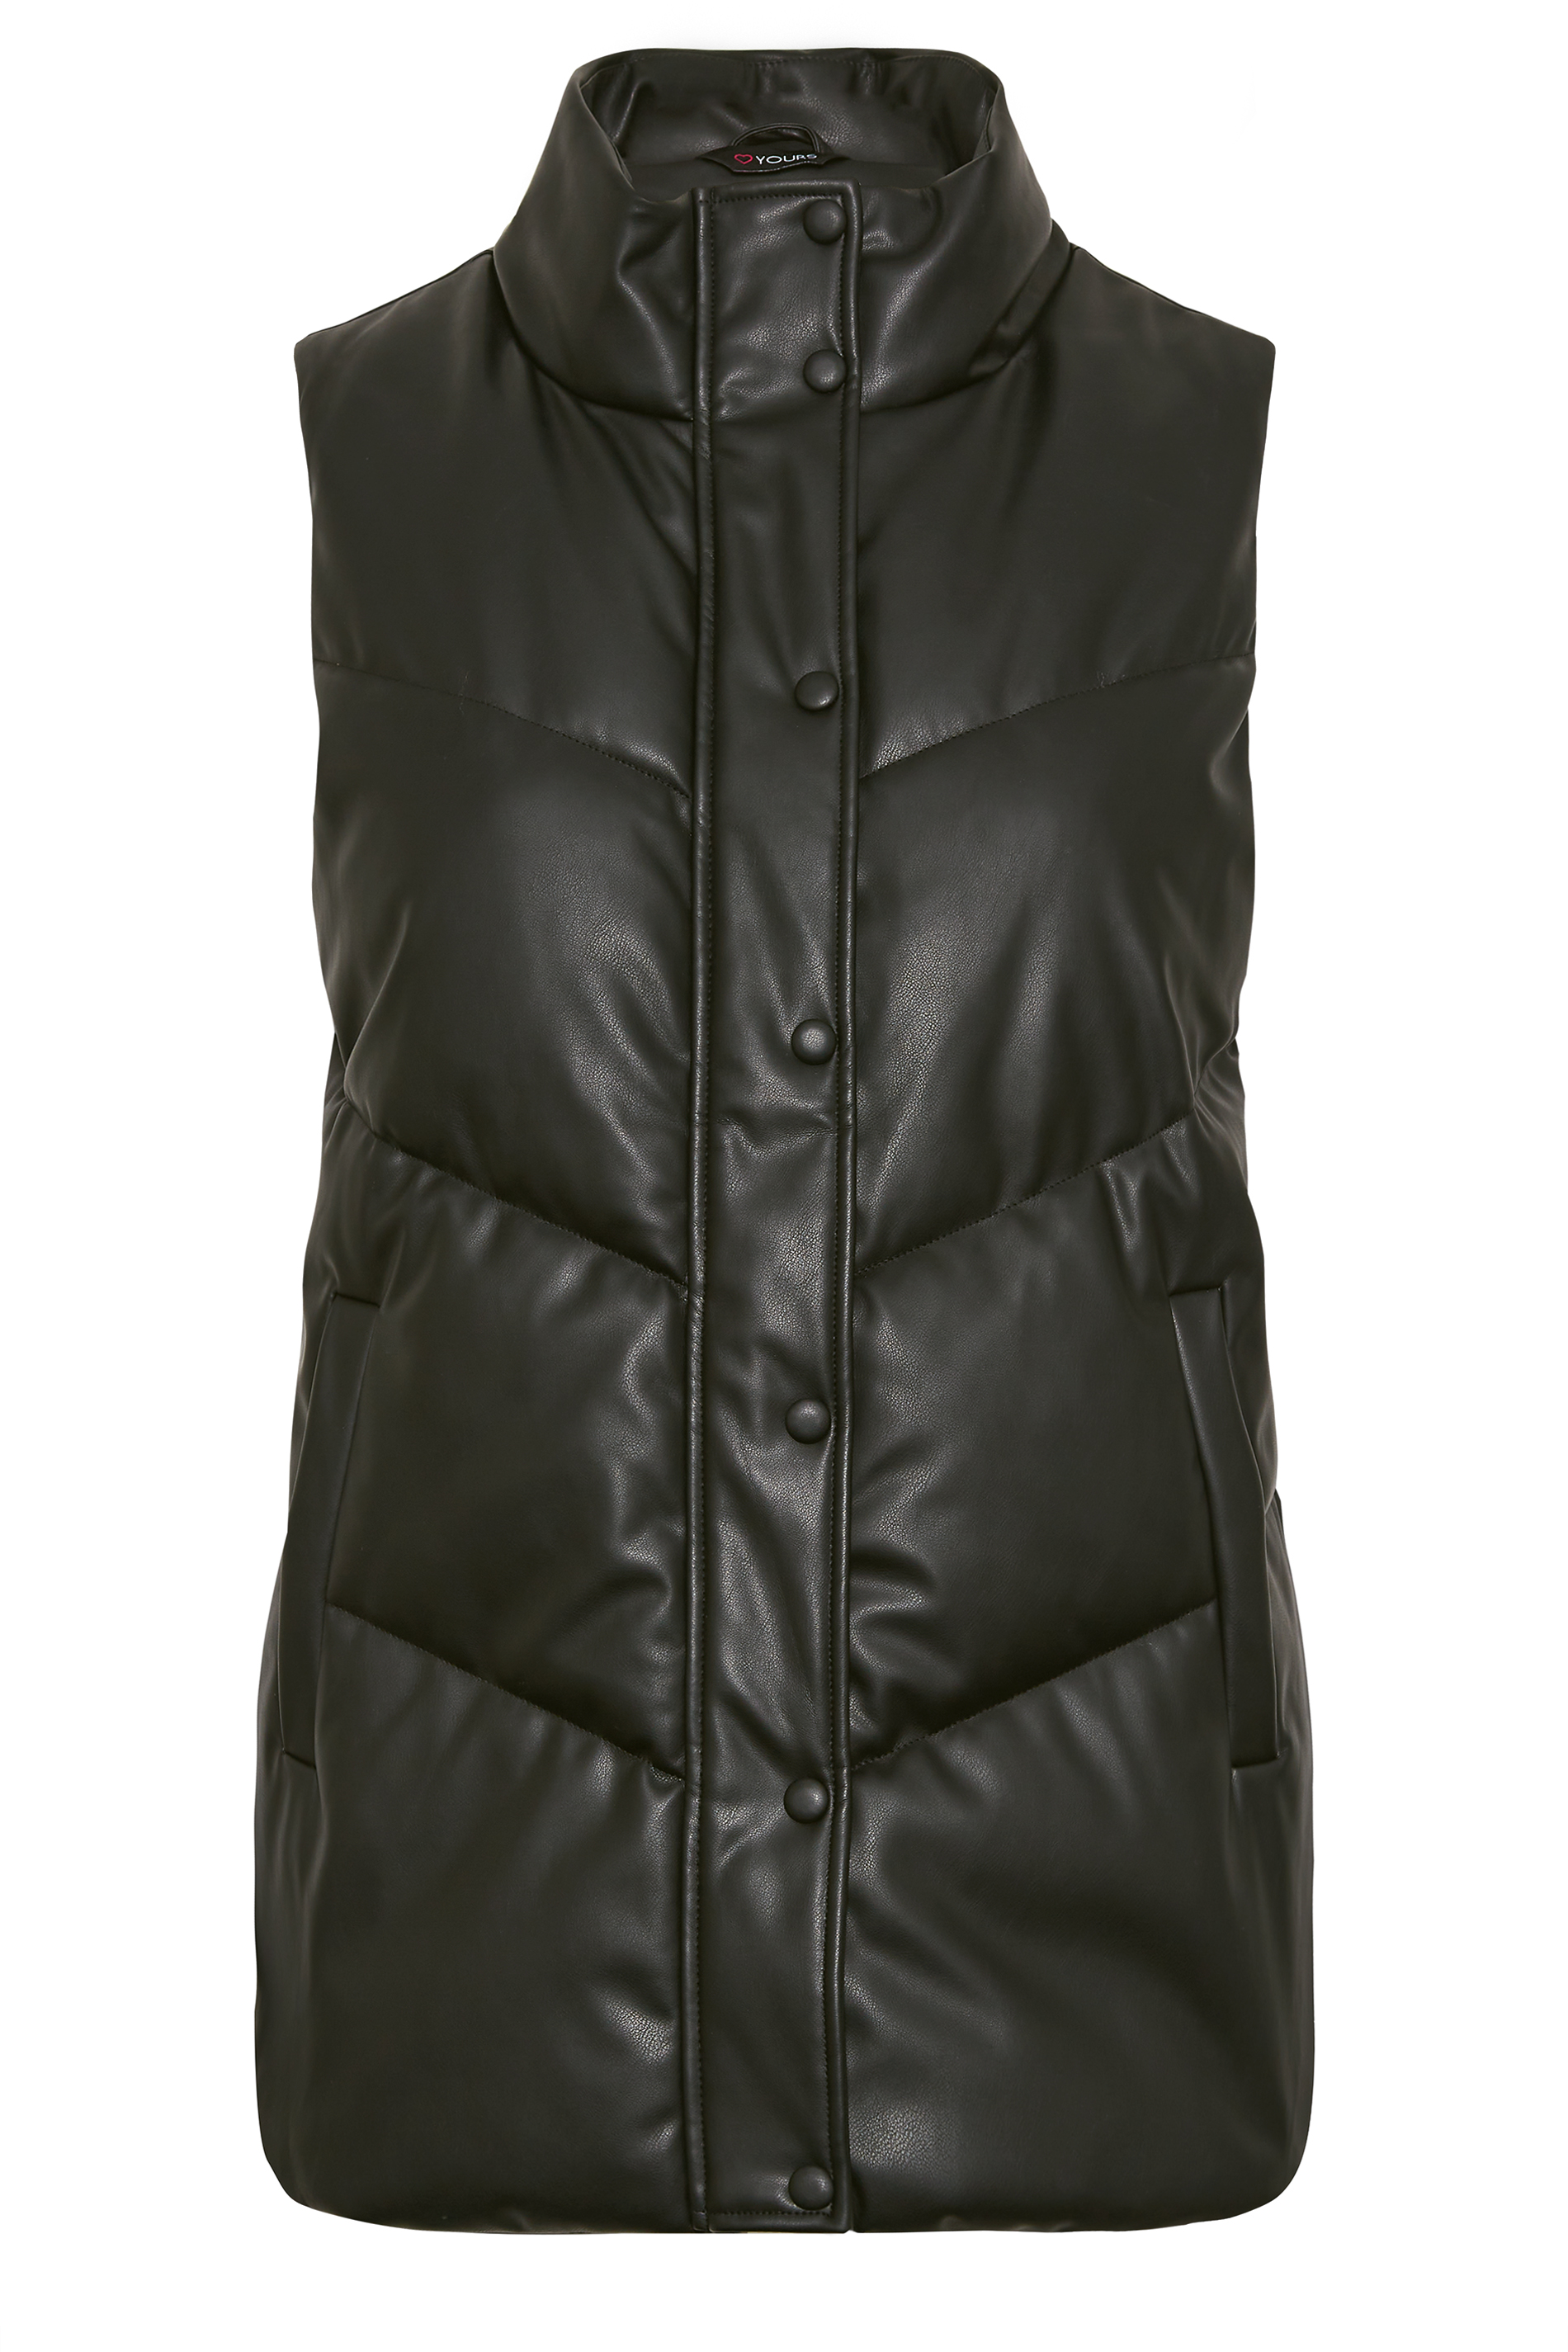 Yours Curve Women's Cropped Gilet